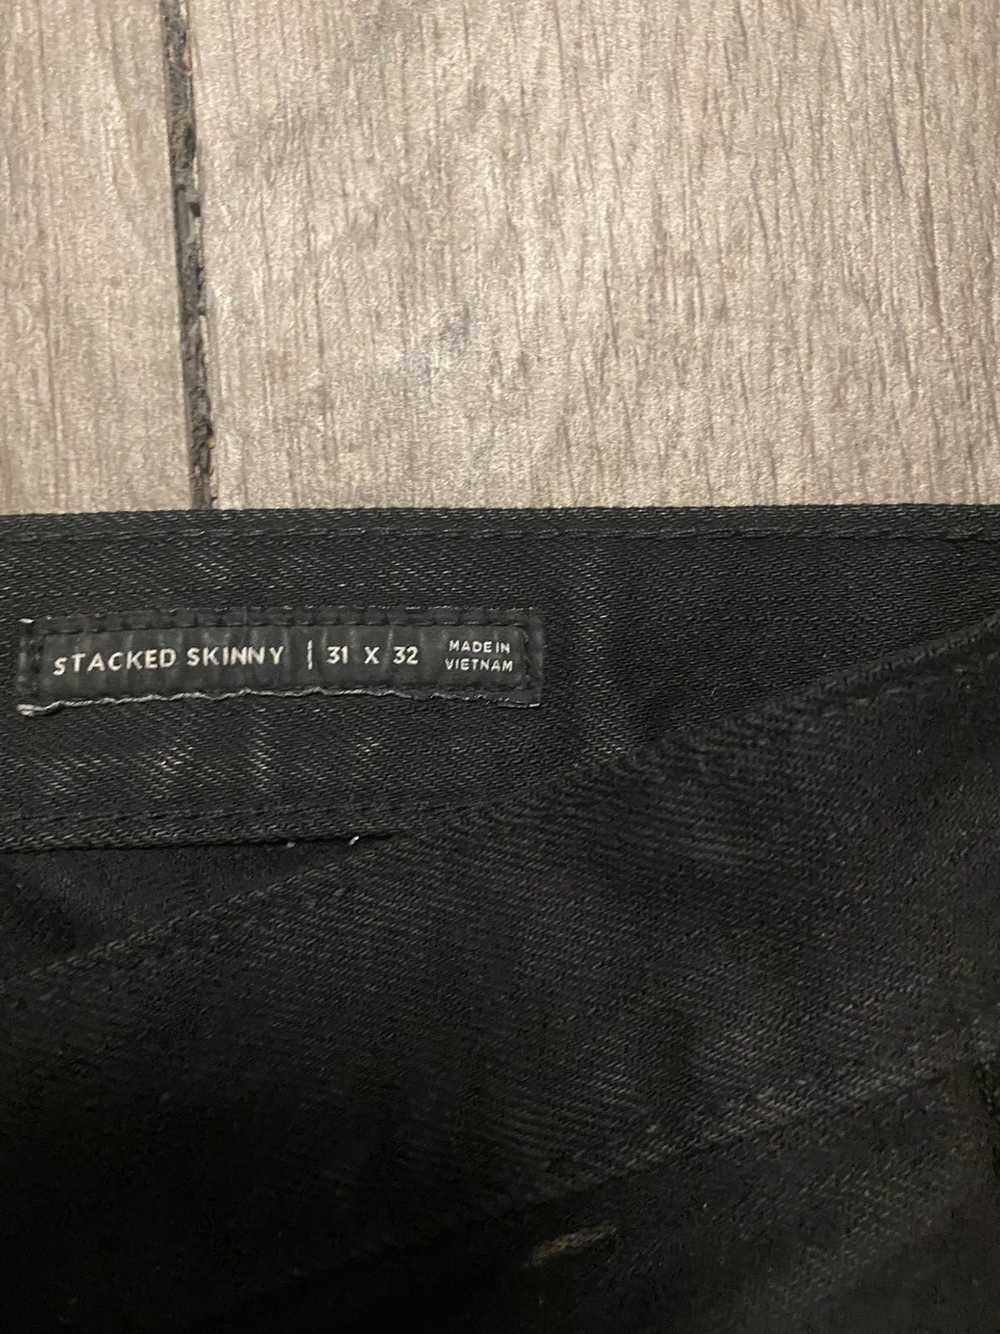 Pacsun NWT Pacsun Stacked Skinny Jeans - image 2